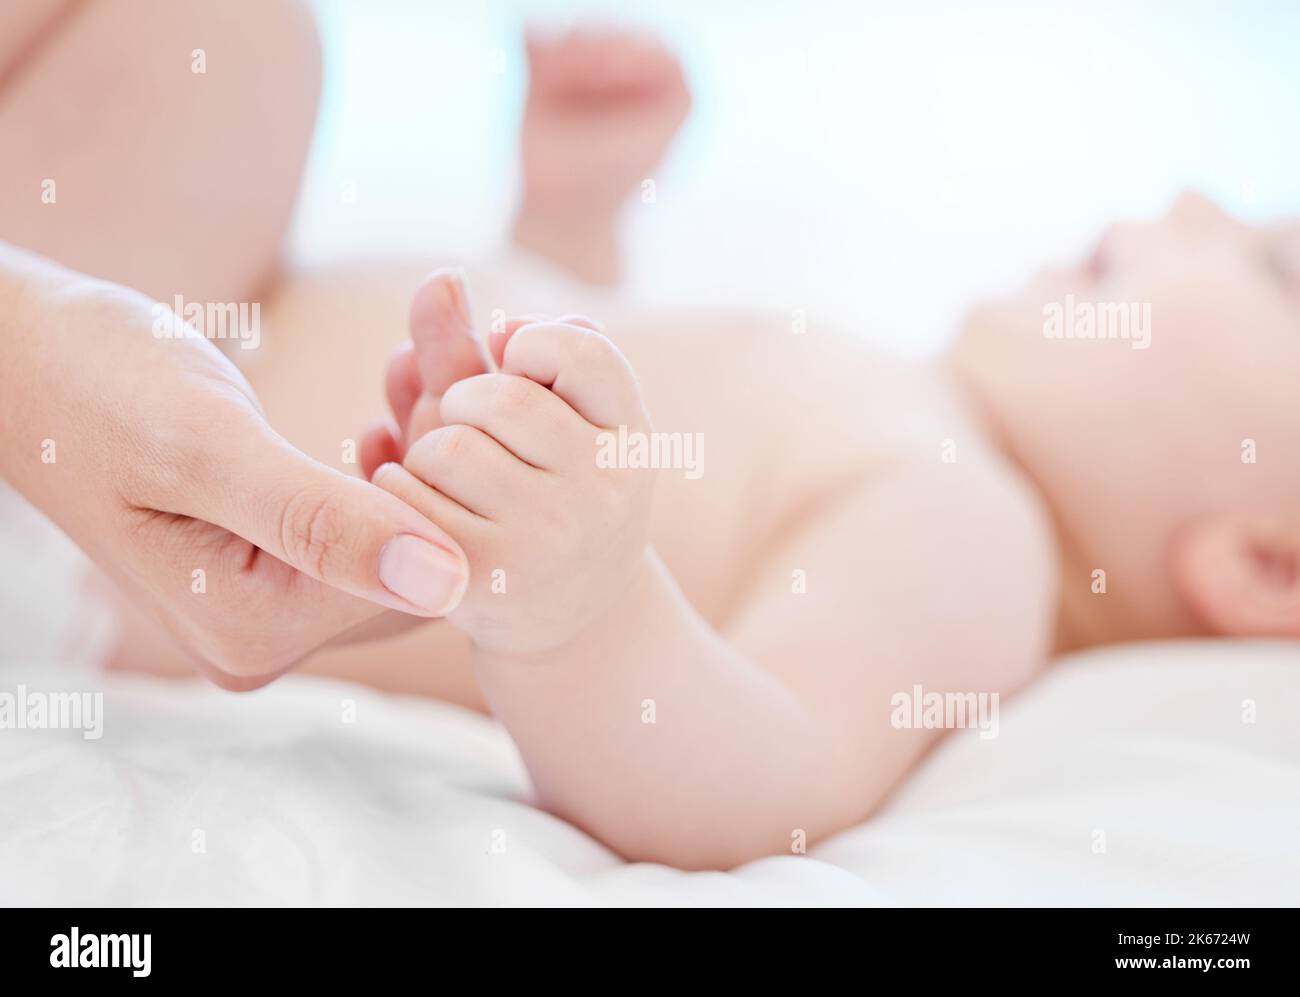 Im gonna take care of you. a baby and mother bonding on a bed at home. Stock Photo